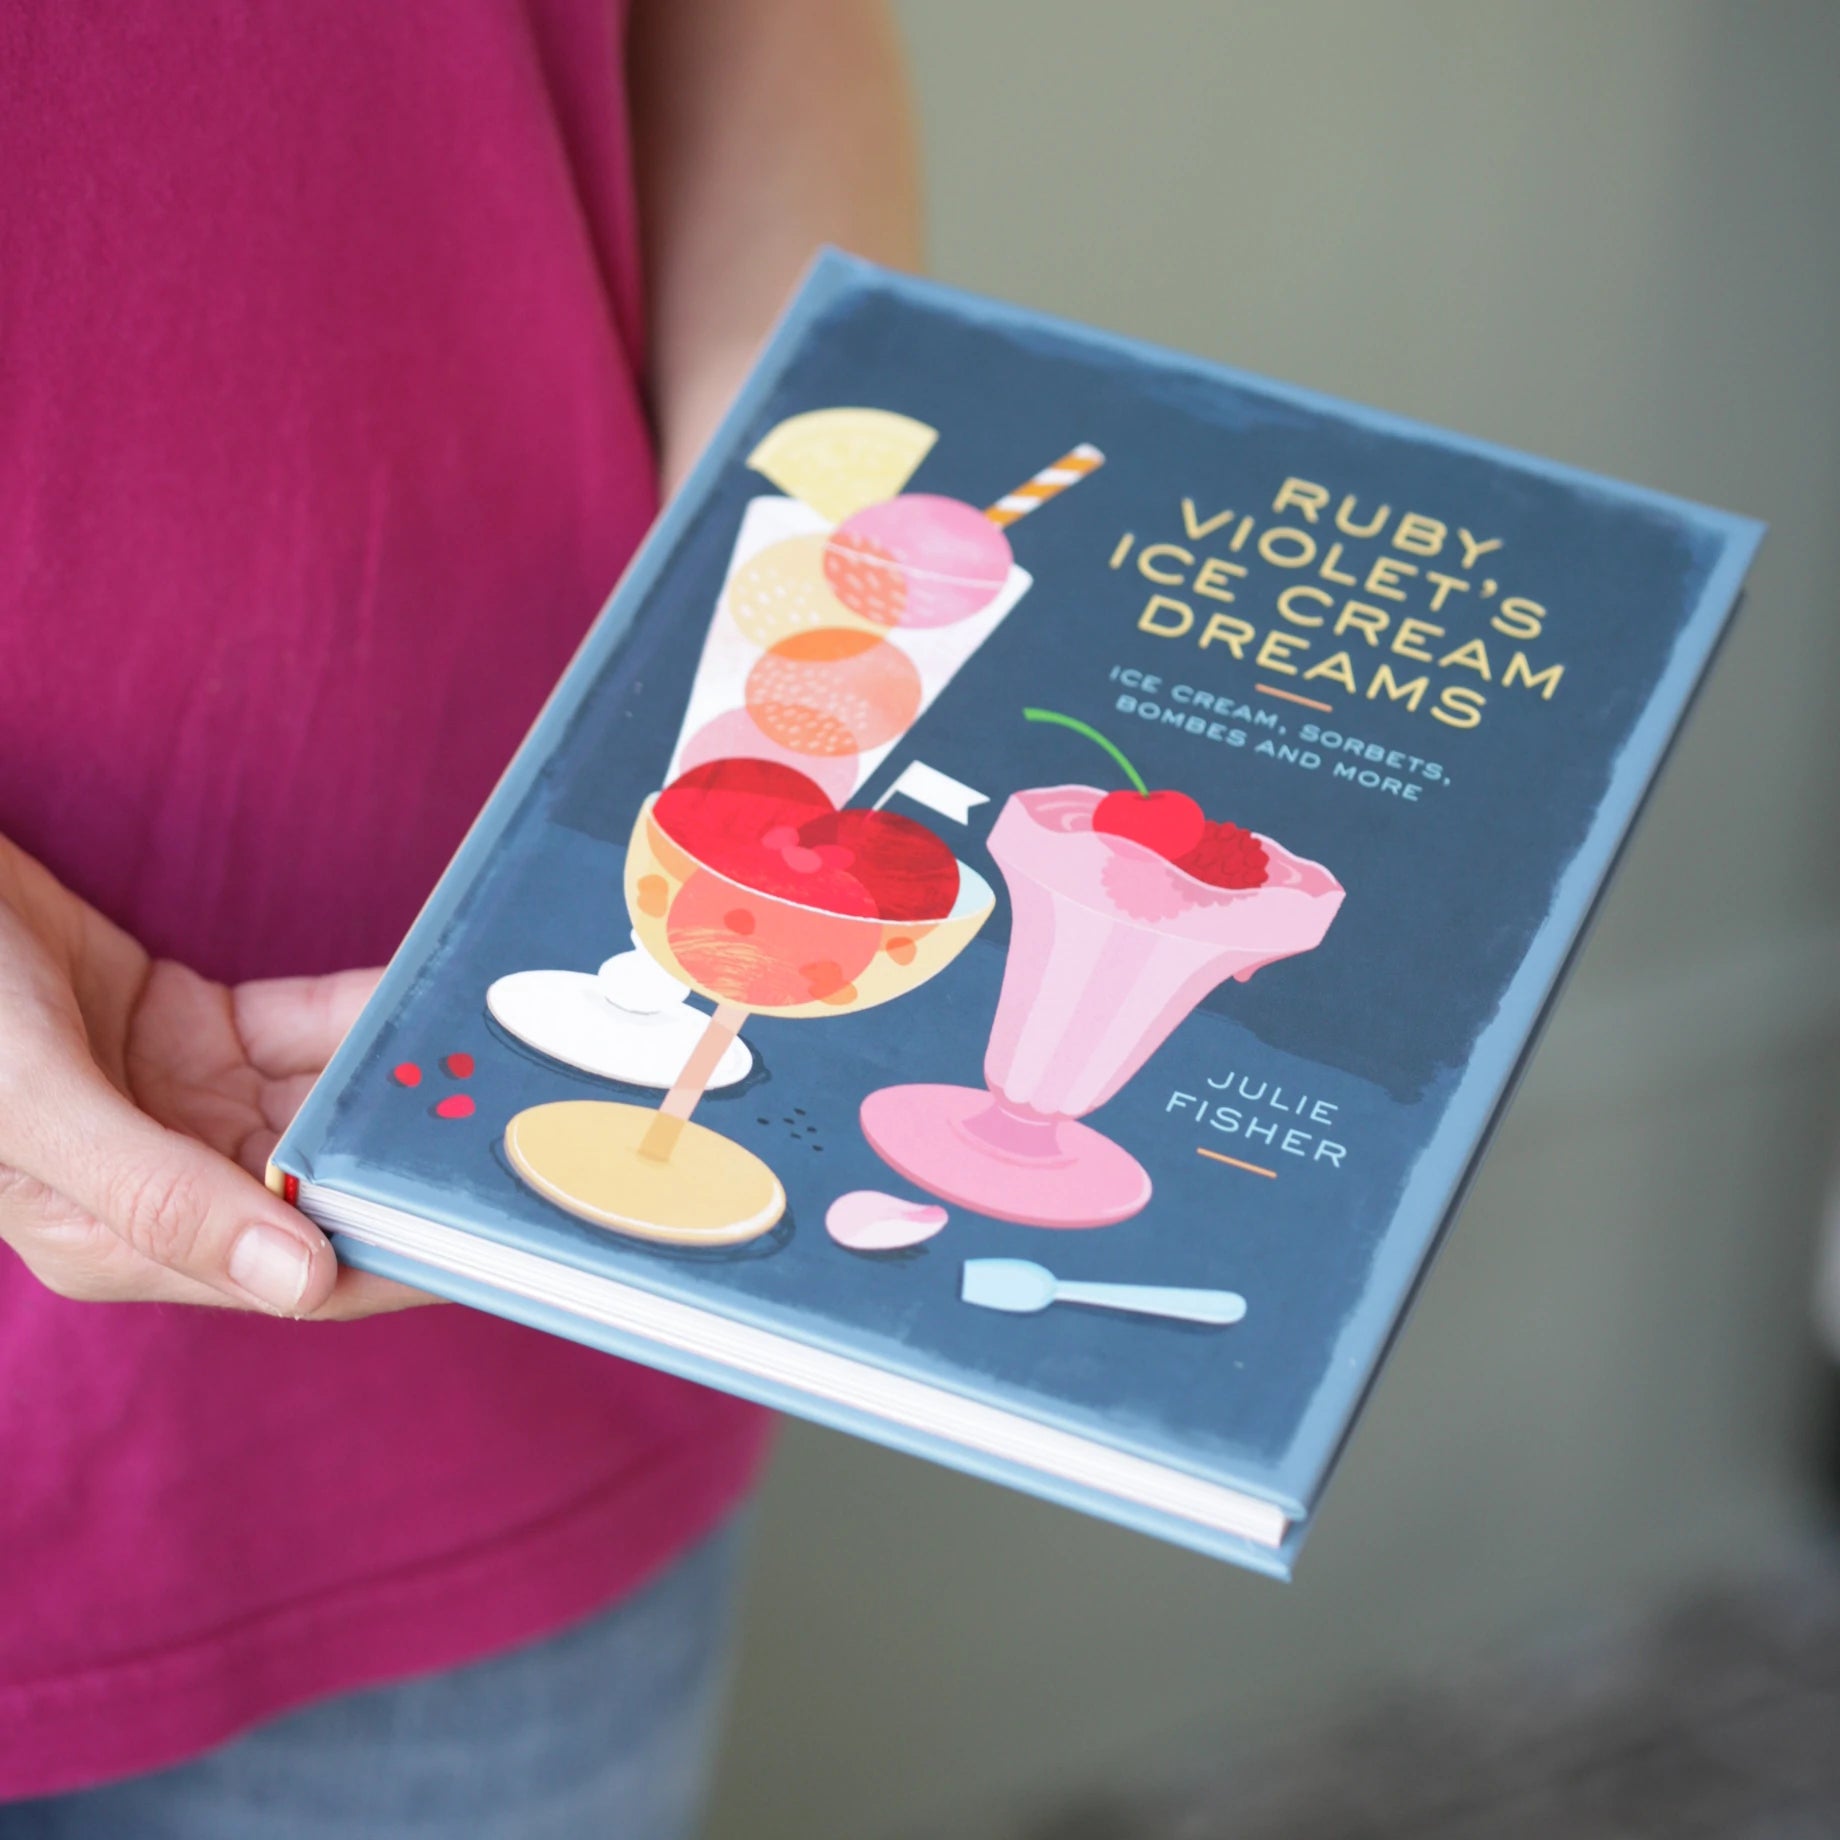 RUBY VIOLET GIFT APRON & BOOK - Ruby Violet Ice Cream & Sorbet